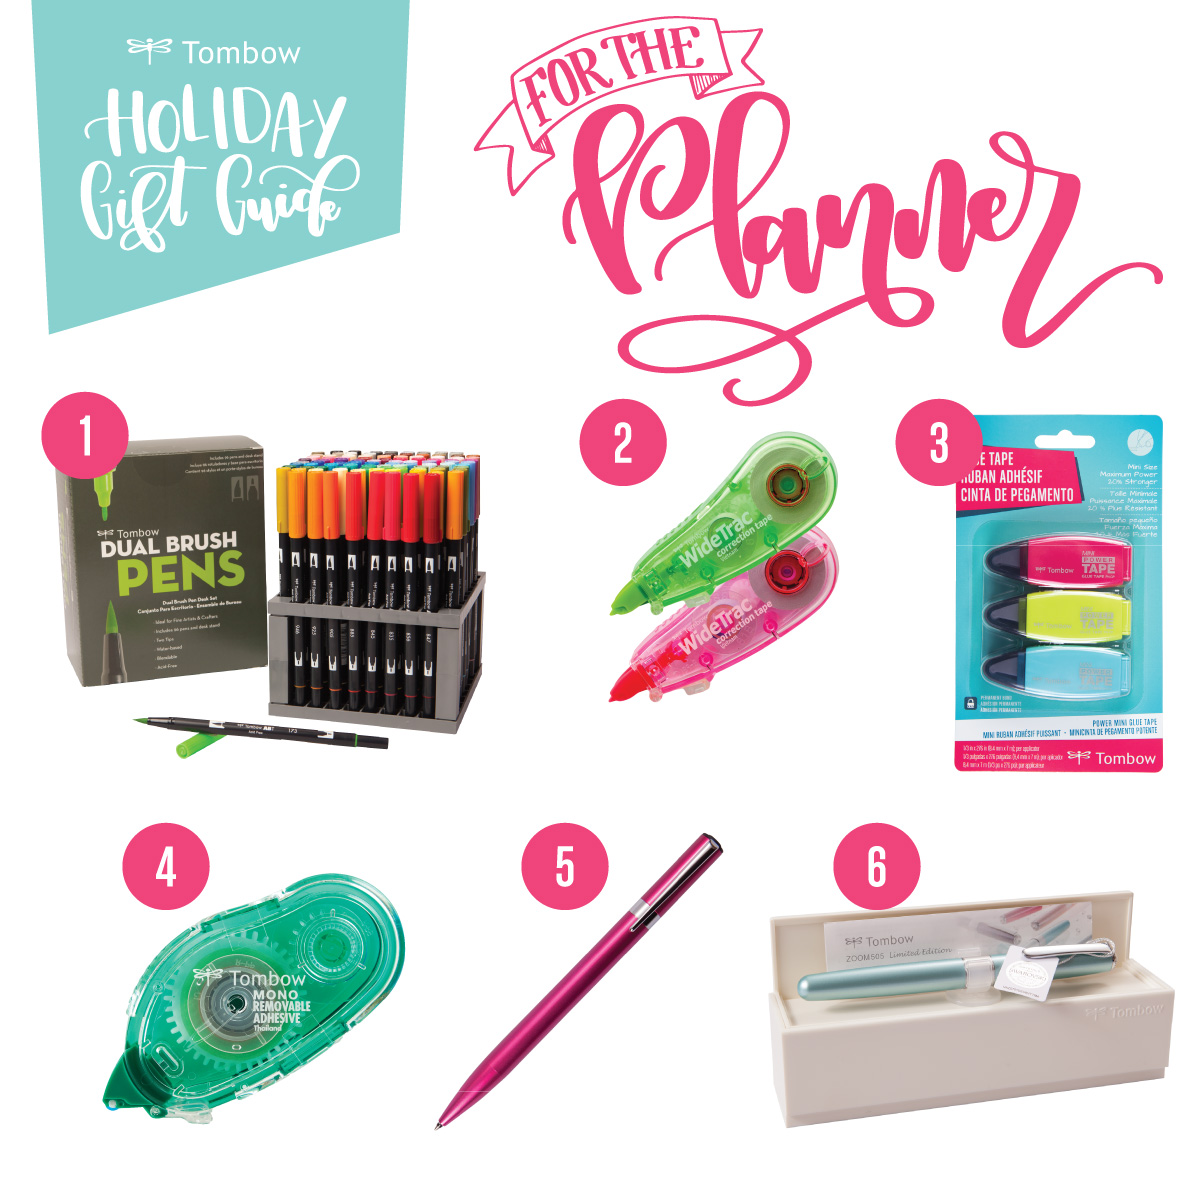 Planner girl gifts from Tombow | Tombow Holiday Gift Guide | The best gifts for planners from @tombowusa